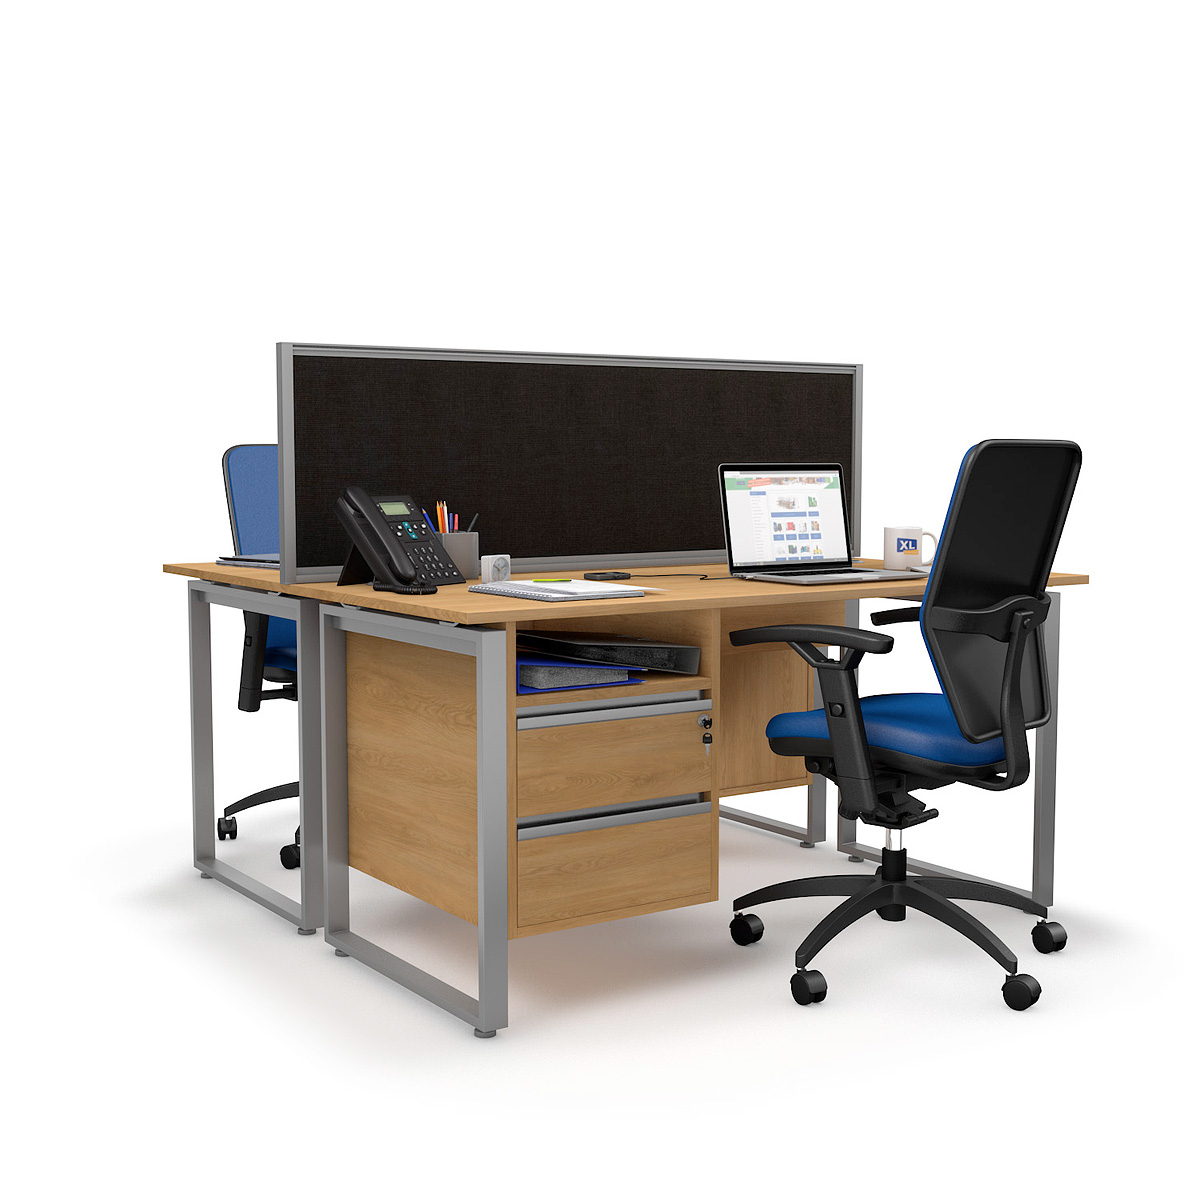 FRONTIER® Office Screen Desk Dividers  - Black Desk Screens With Silver Frame